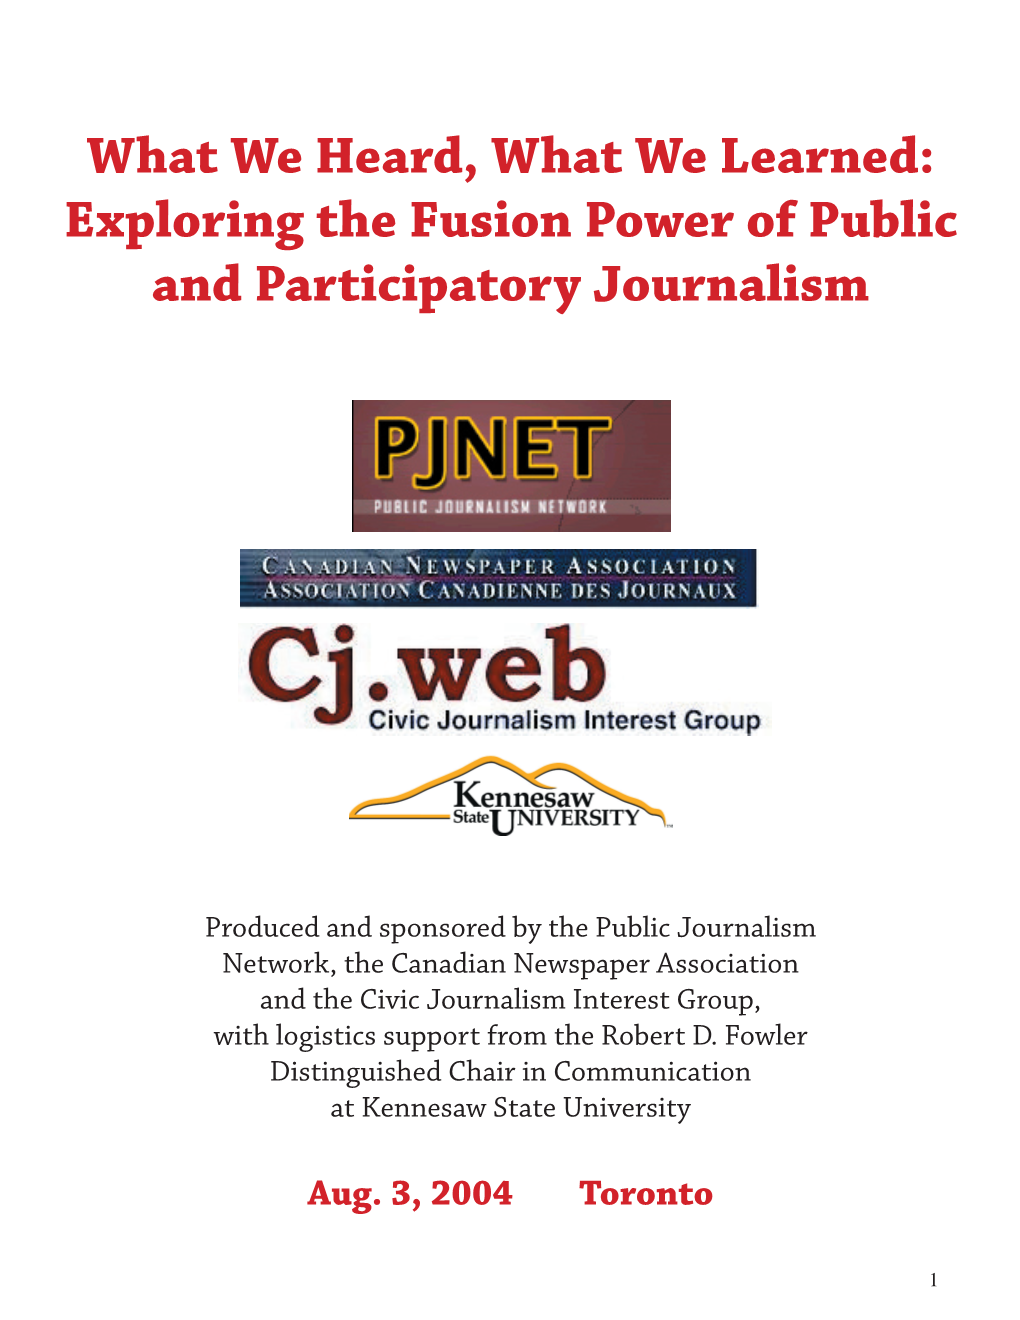 Fusion Power of Public and Participatory Journalism